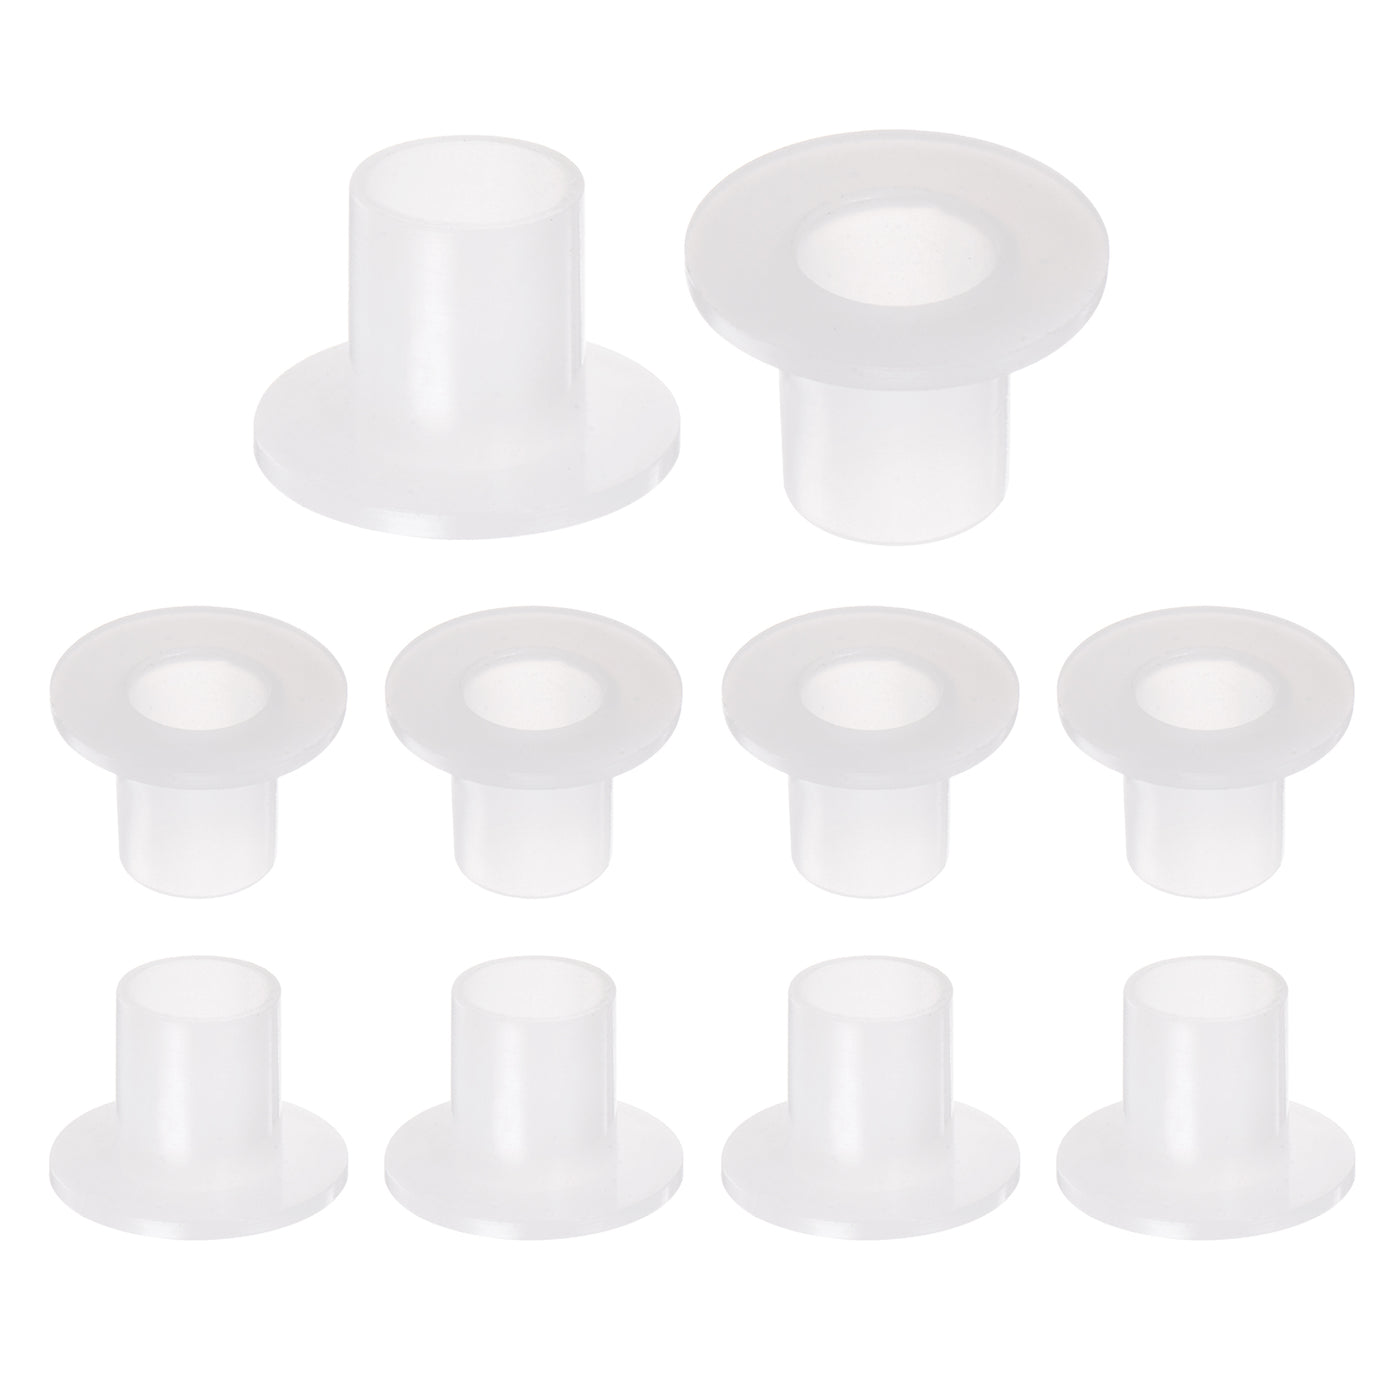 uxcell Uxcell 10pcs Flanged Sleeve Bearings 8.1mm ID 10.1mm OD 12.2mm L, Nylon Bushings, White